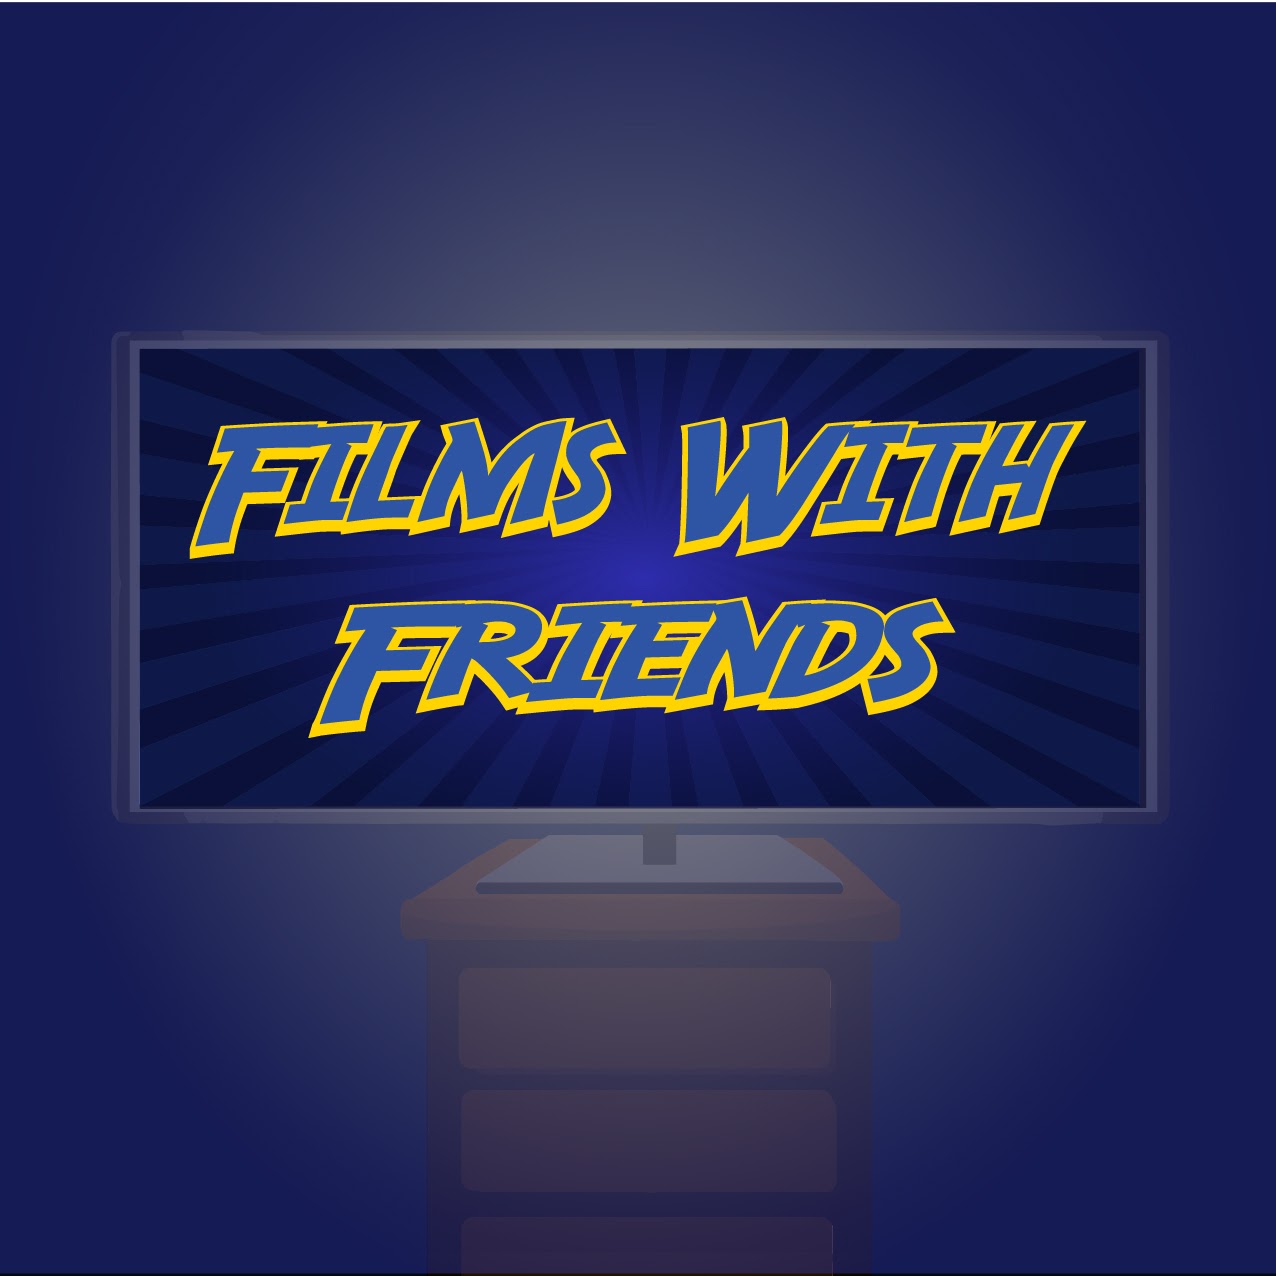 The filmswithfriends Podcast